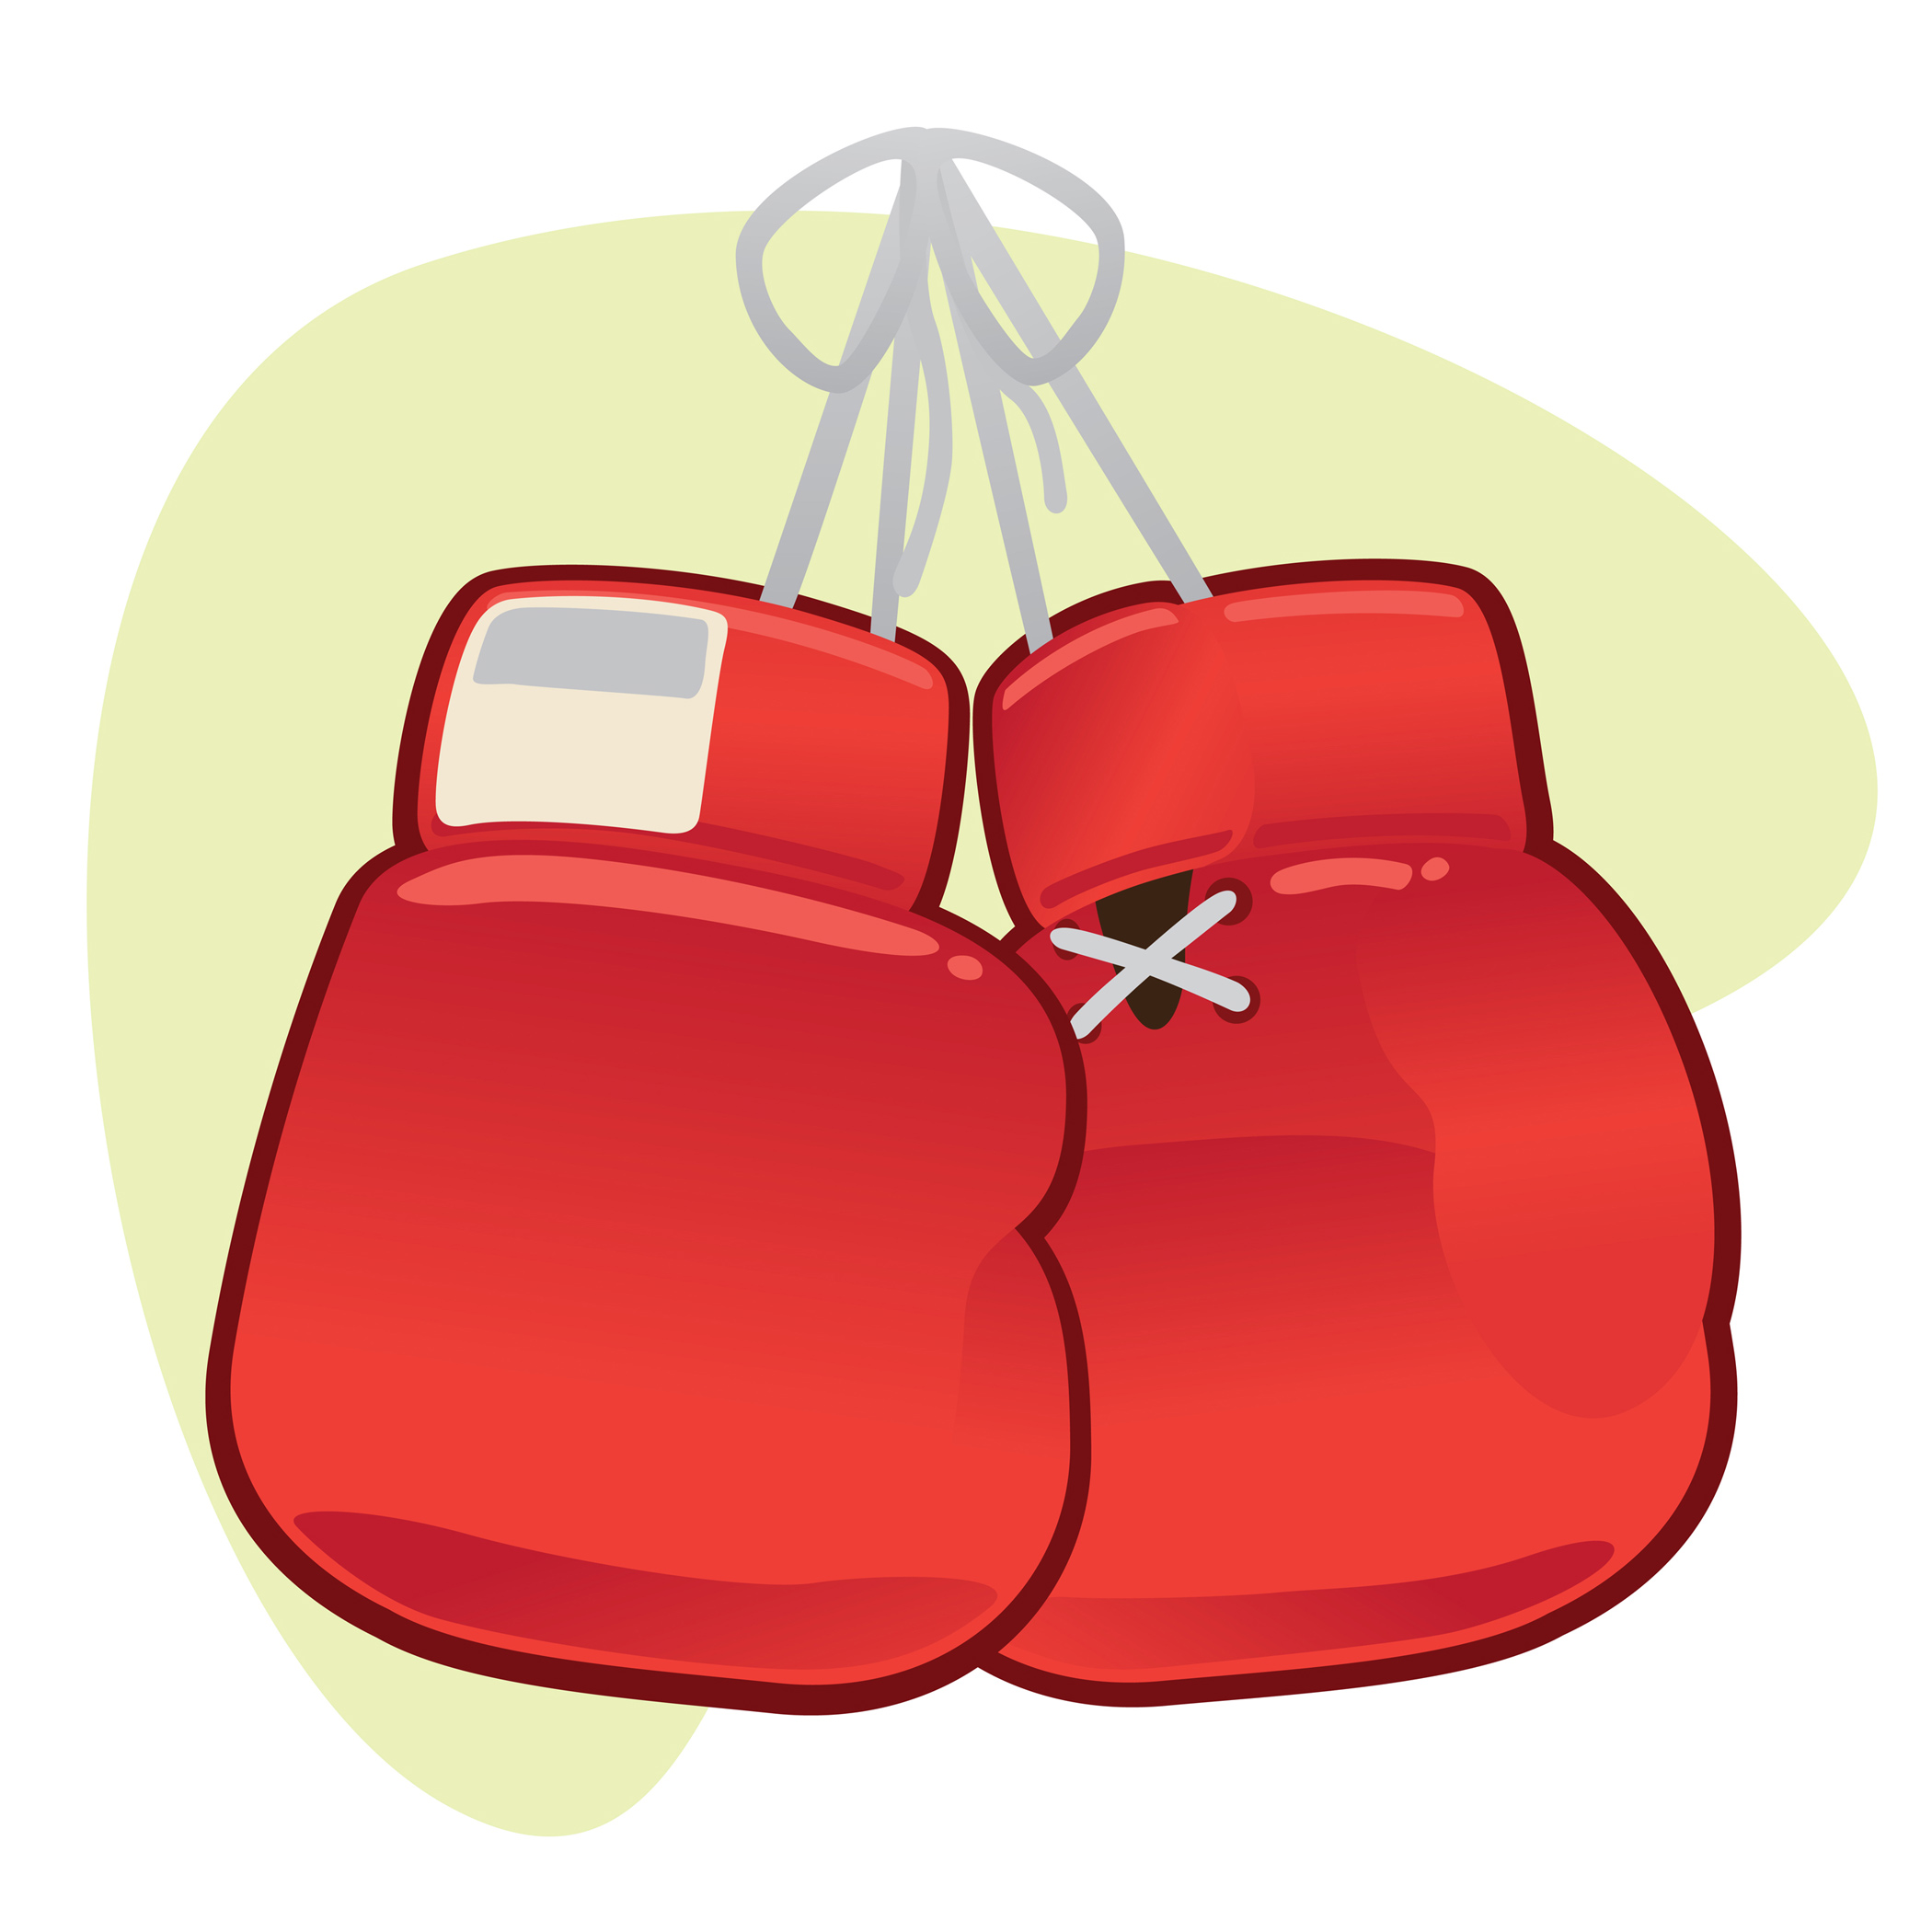 Boxing gloves ing gloves clipart the cliparts